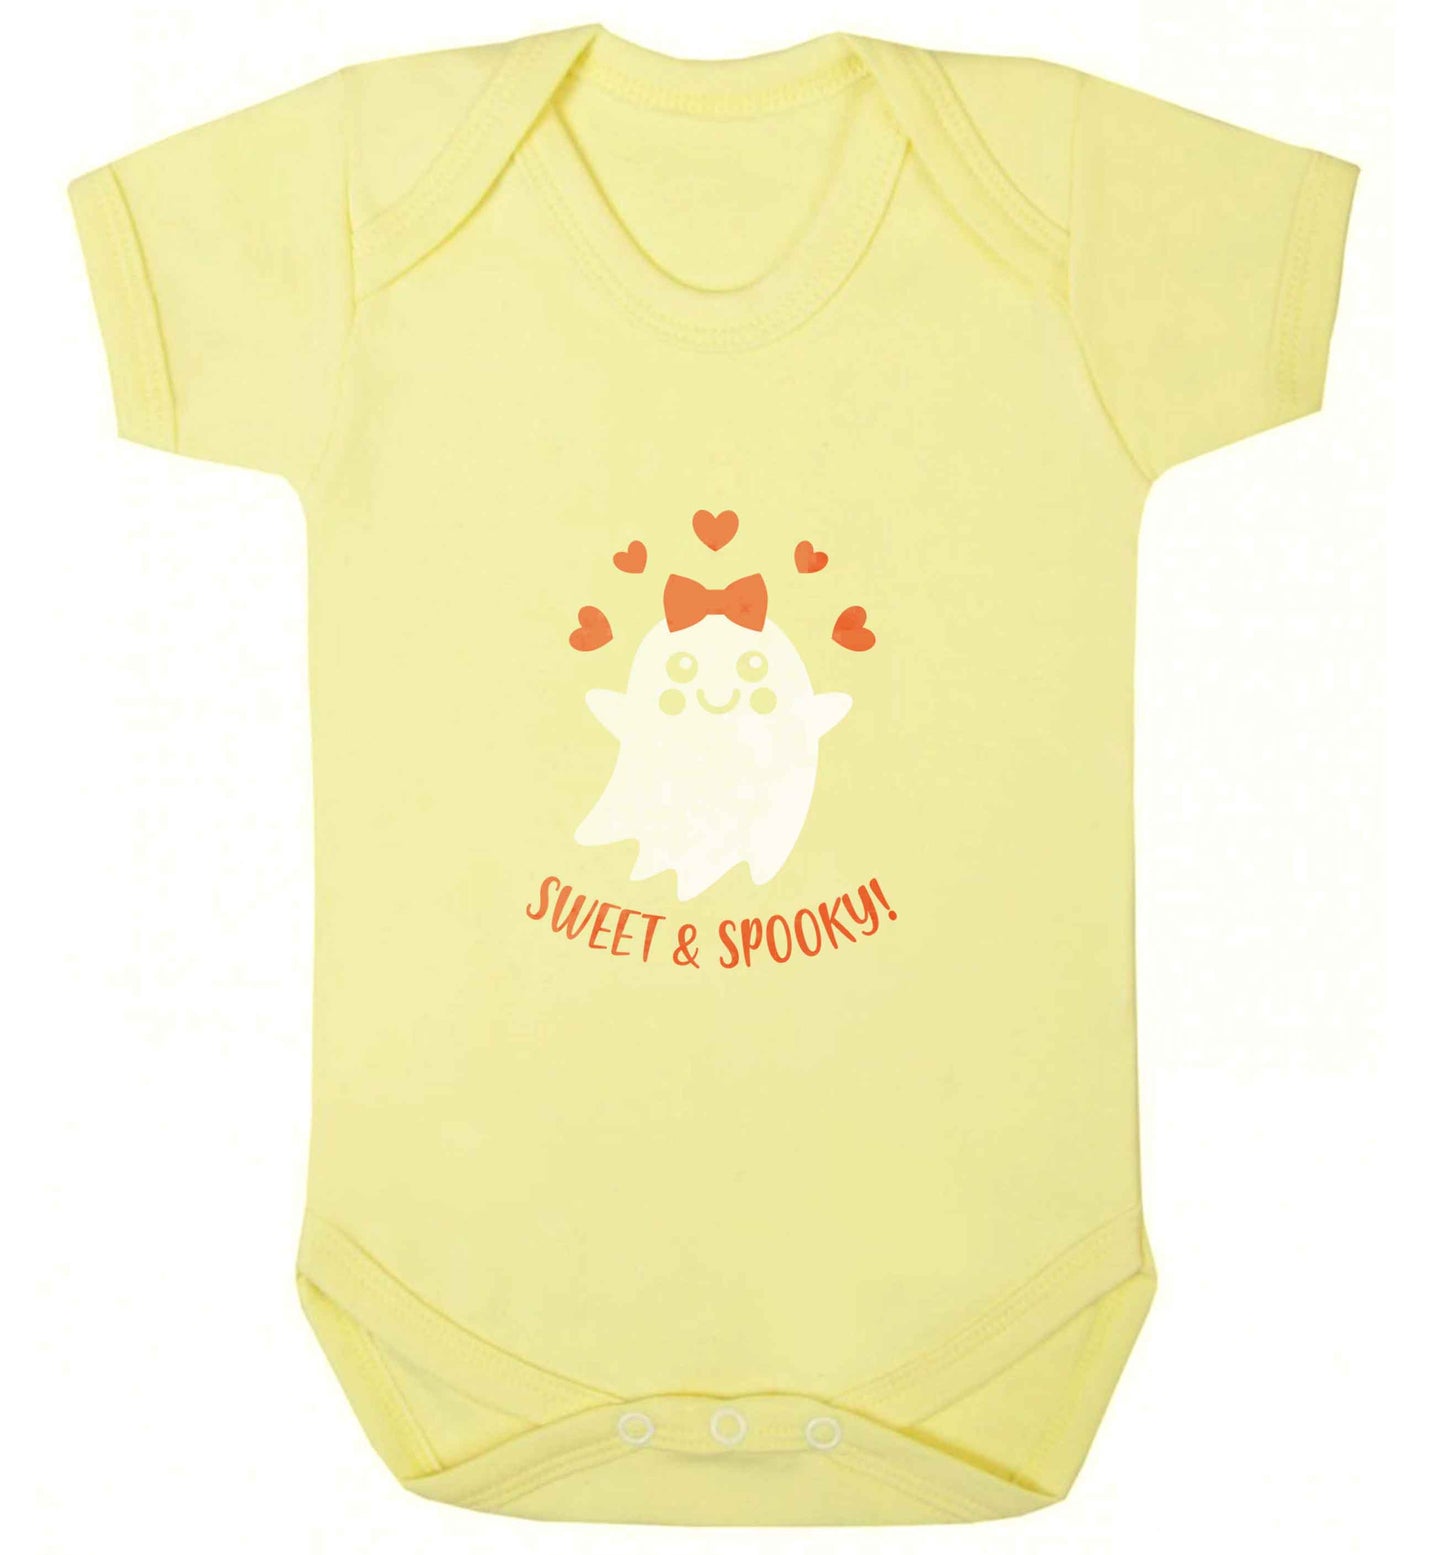 Sweet and spooky baby vest pale yellow 18-24 months